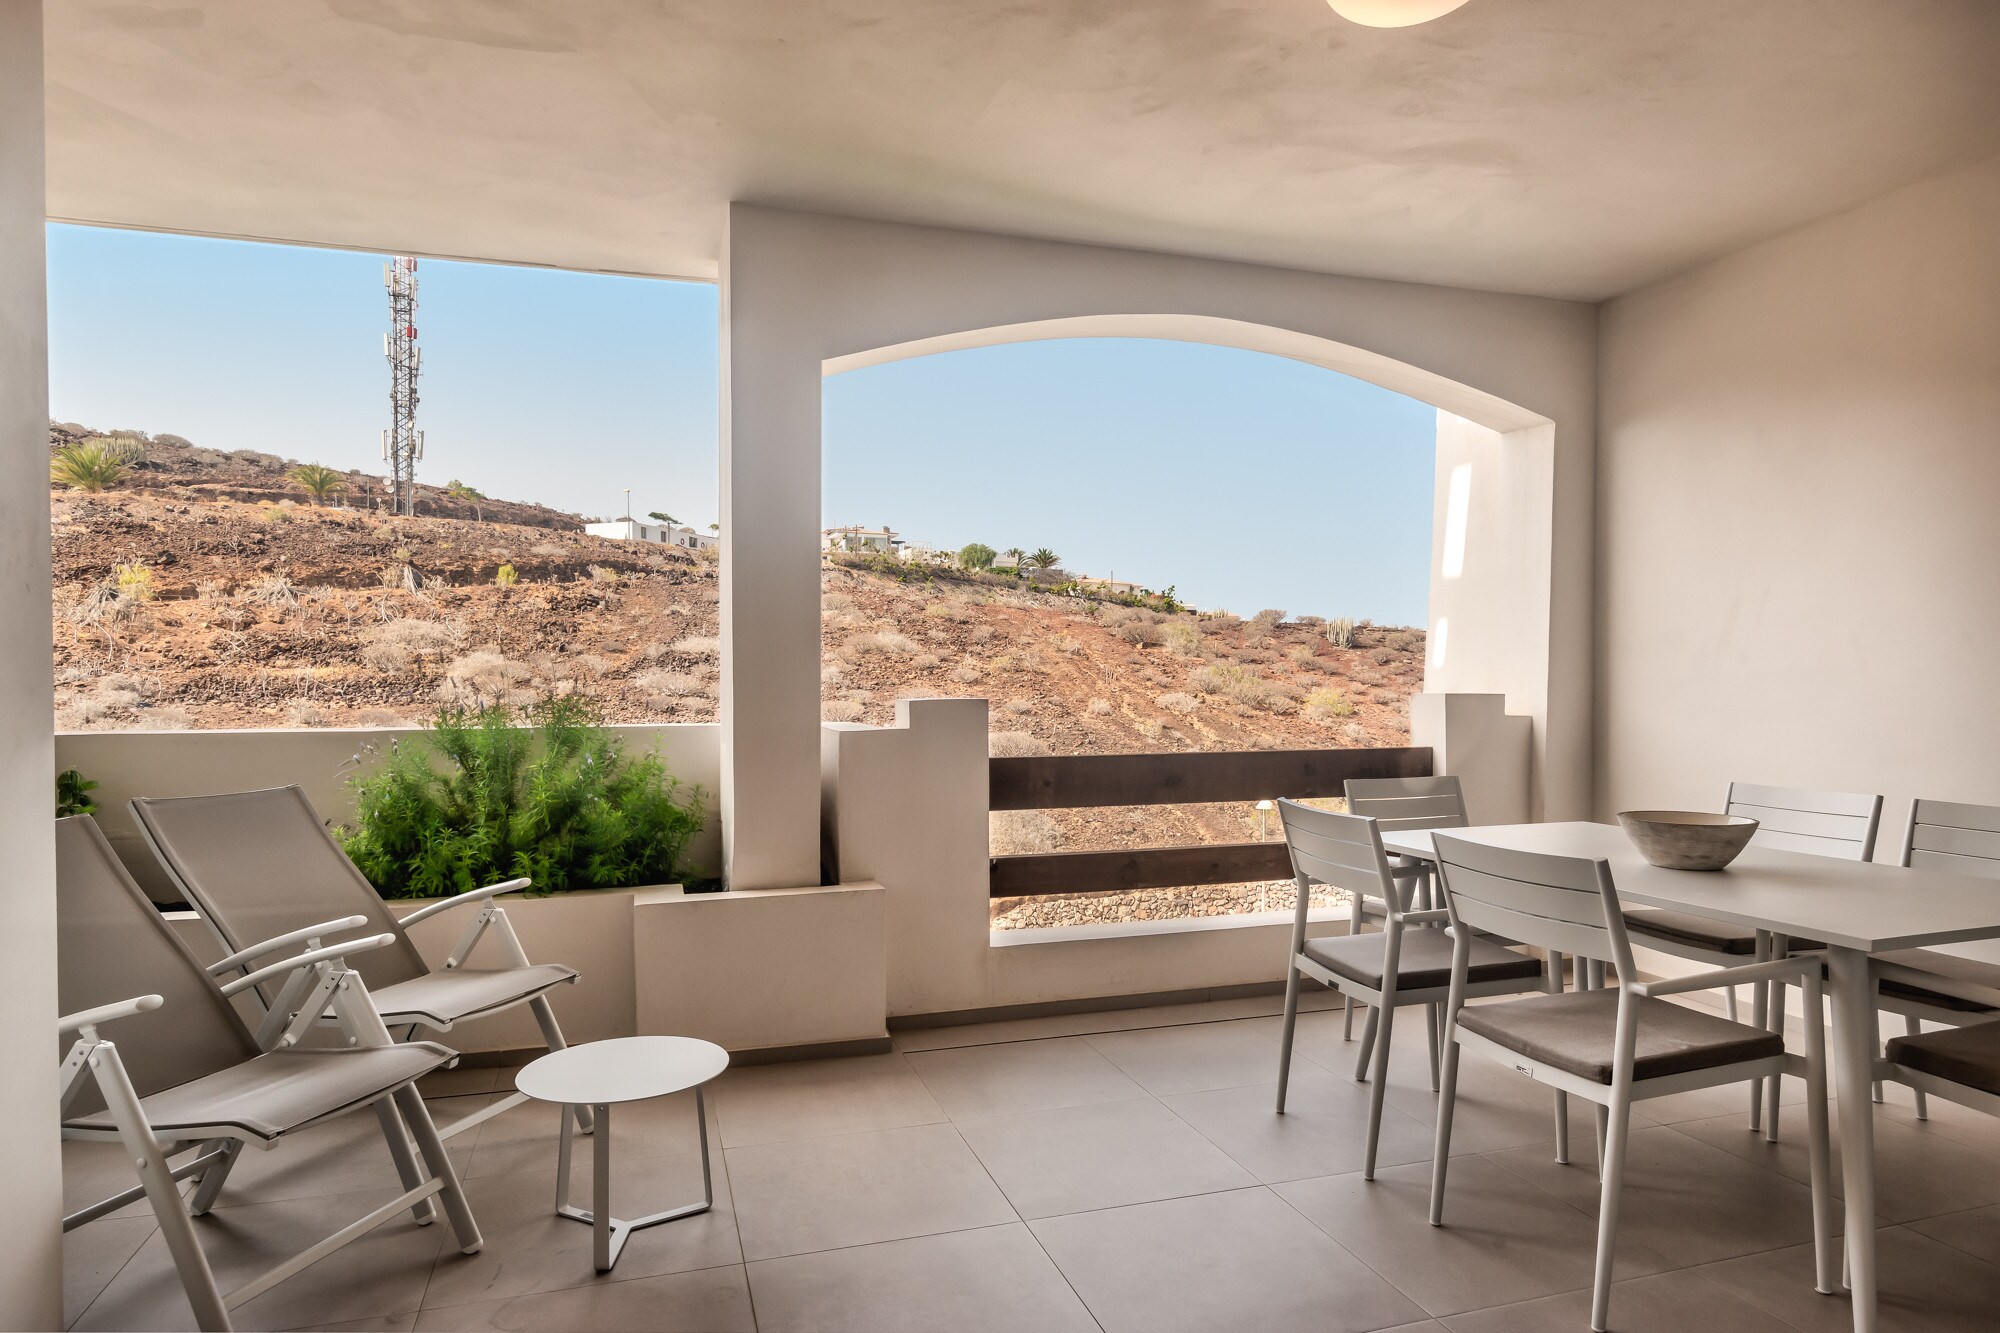 Spacious terrace with views of the mountain